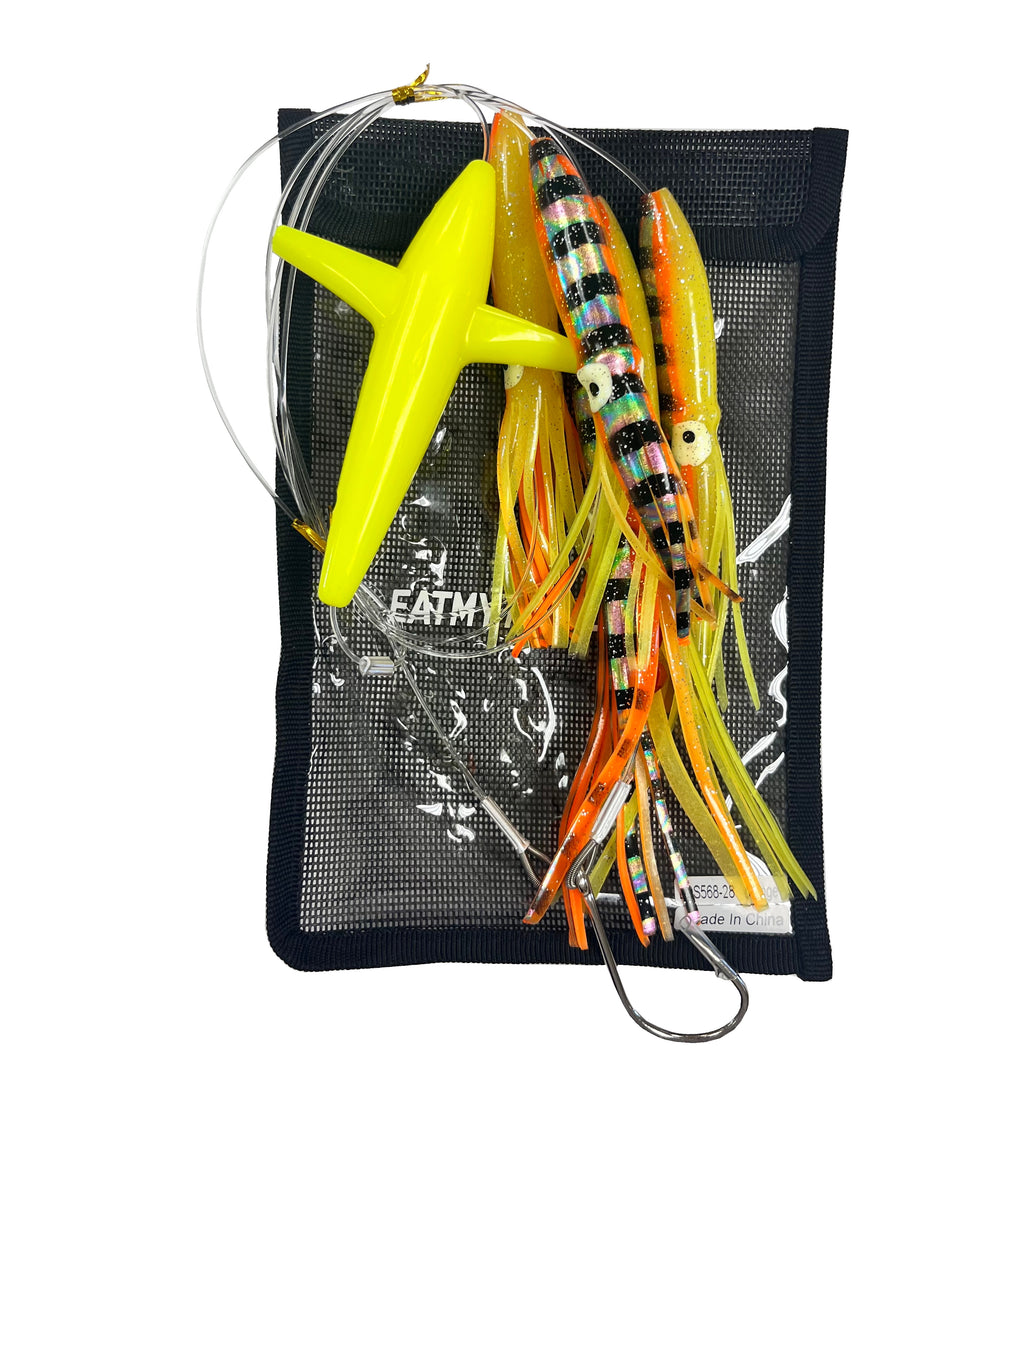 5-Piece Bird and 7” Rubber Squid Chain Kit